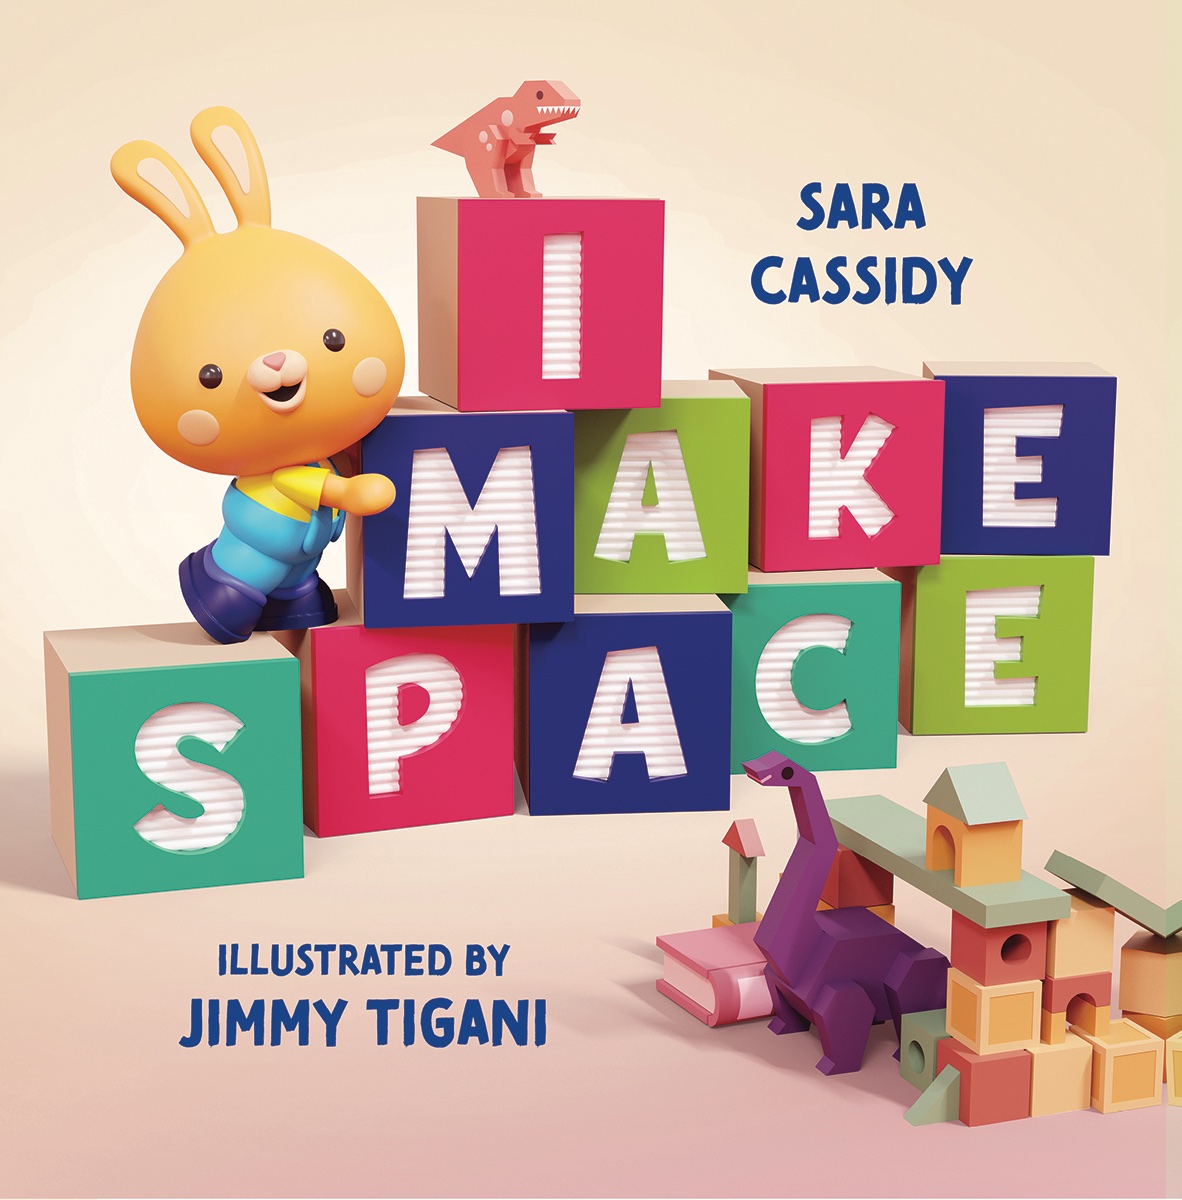 New book for toddlers features a gentle introduction to personal space and consent